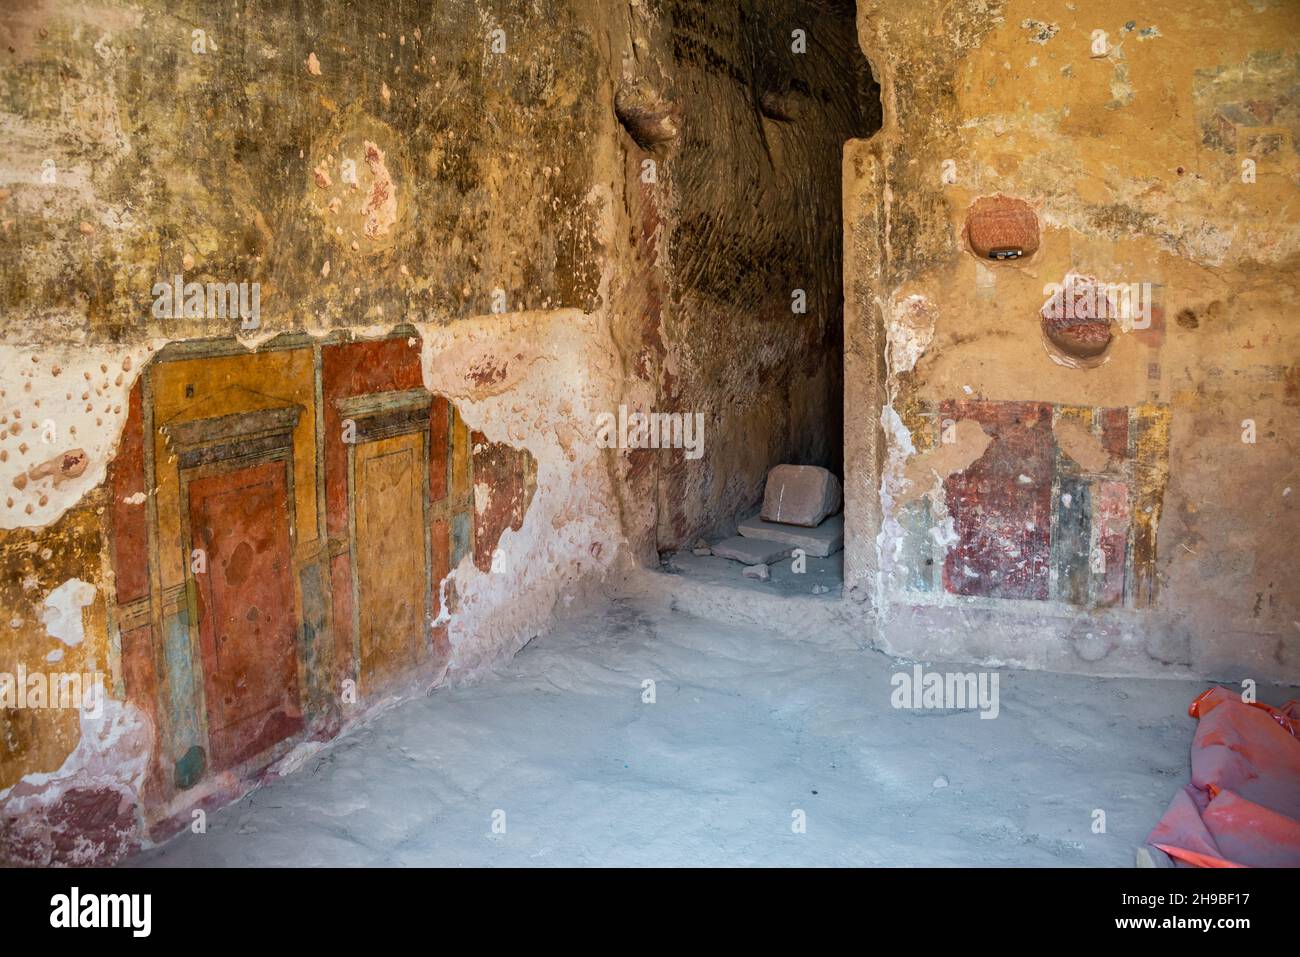 View of the Painted Room in Petra, Jordan Stock Photo